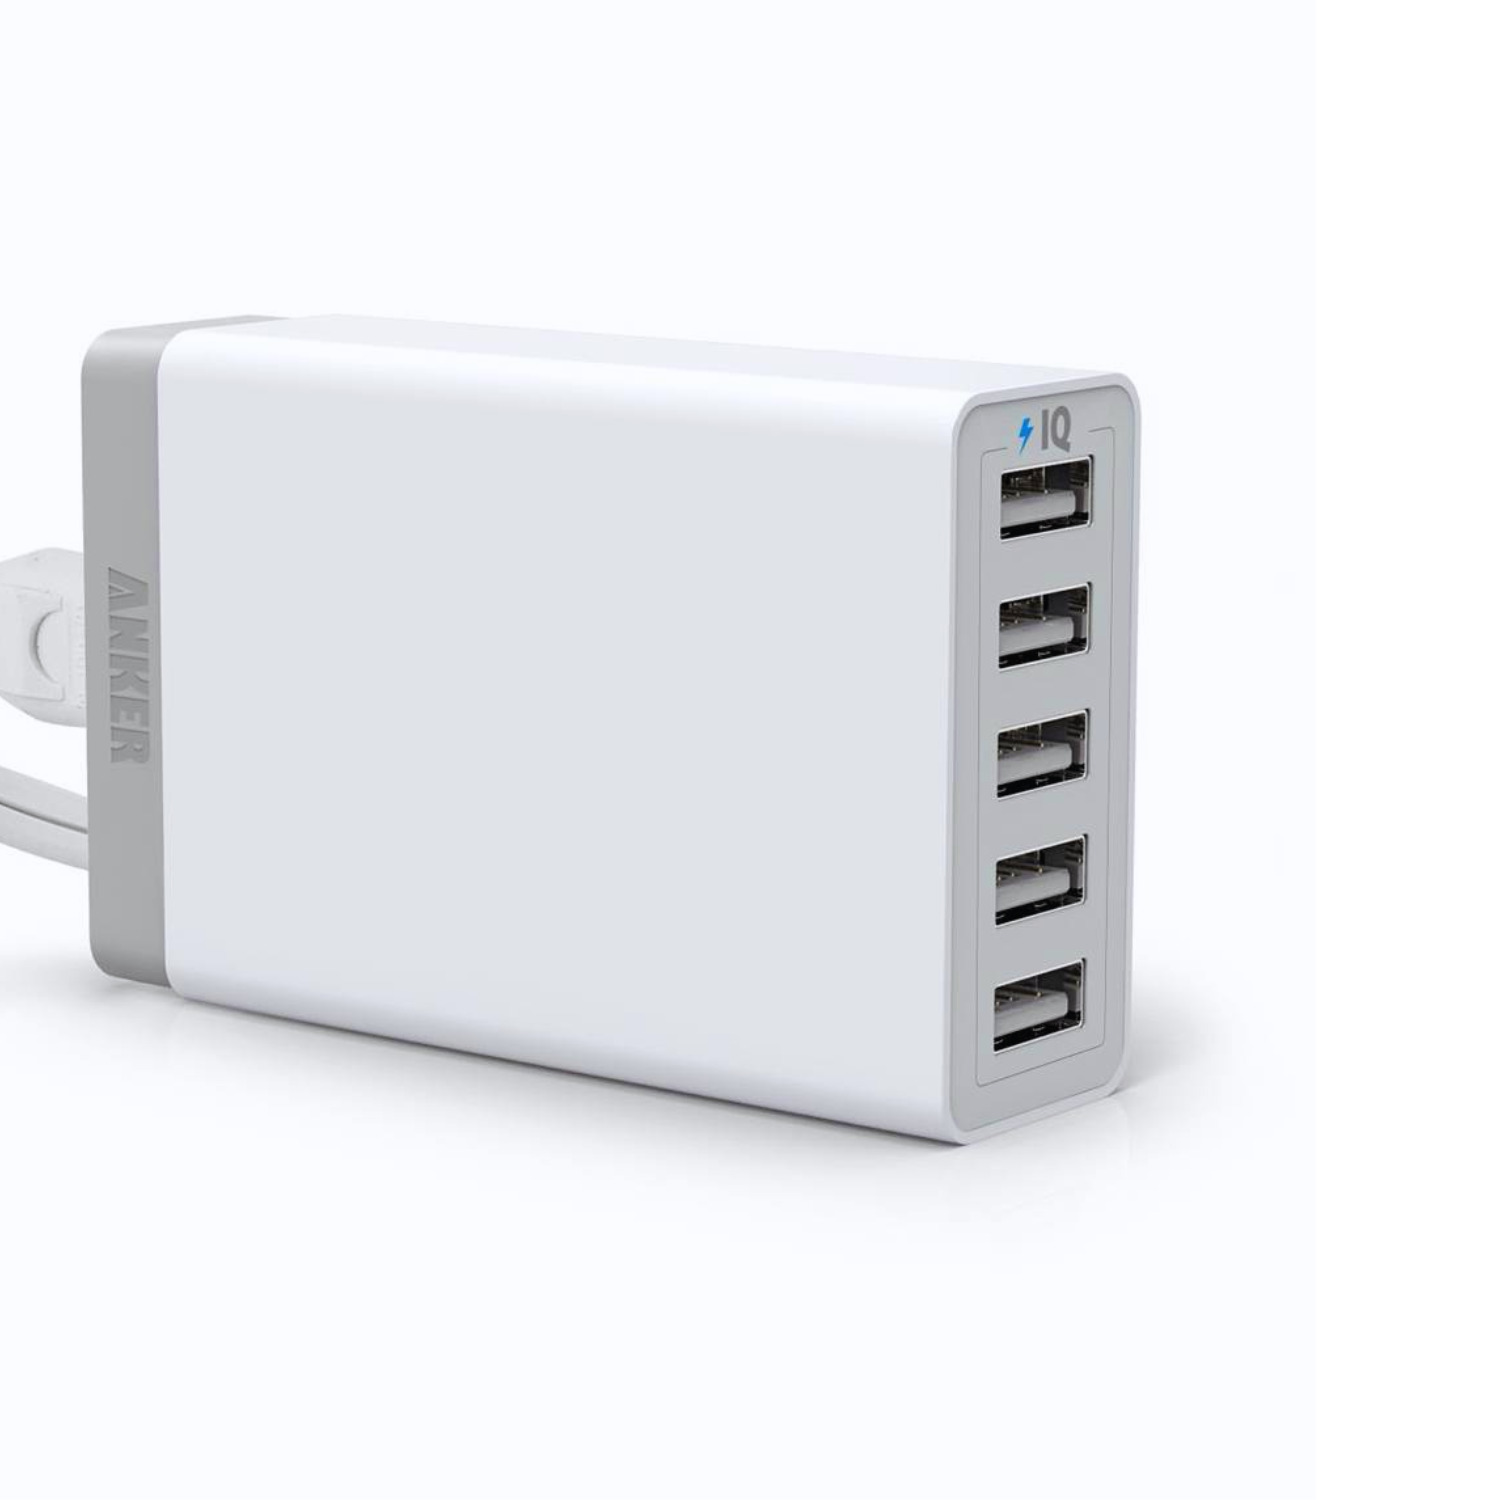 Anker40W/8A 5-Port A2124 PowerPort 5 Wall USB Charger White USB Charger